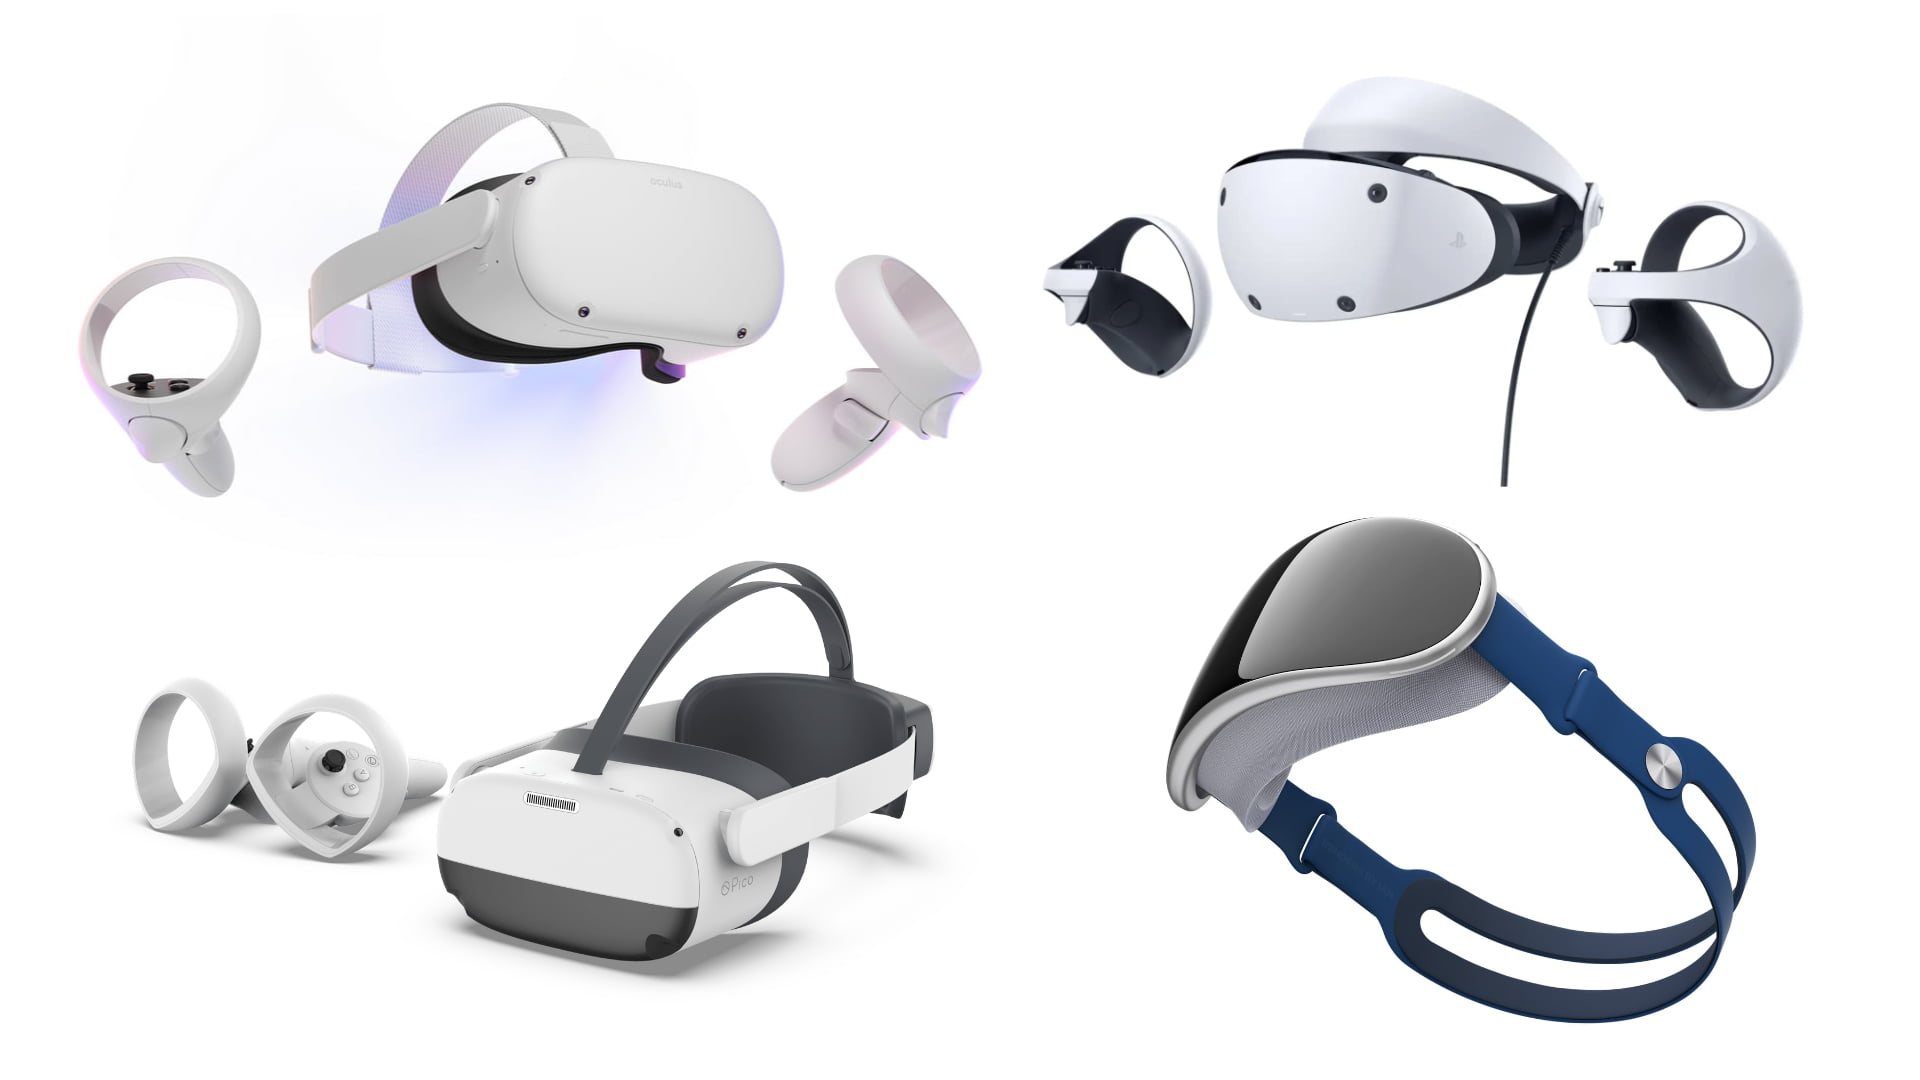 Meta’s VR strategy unsustainable, Apple in spotlight – market research